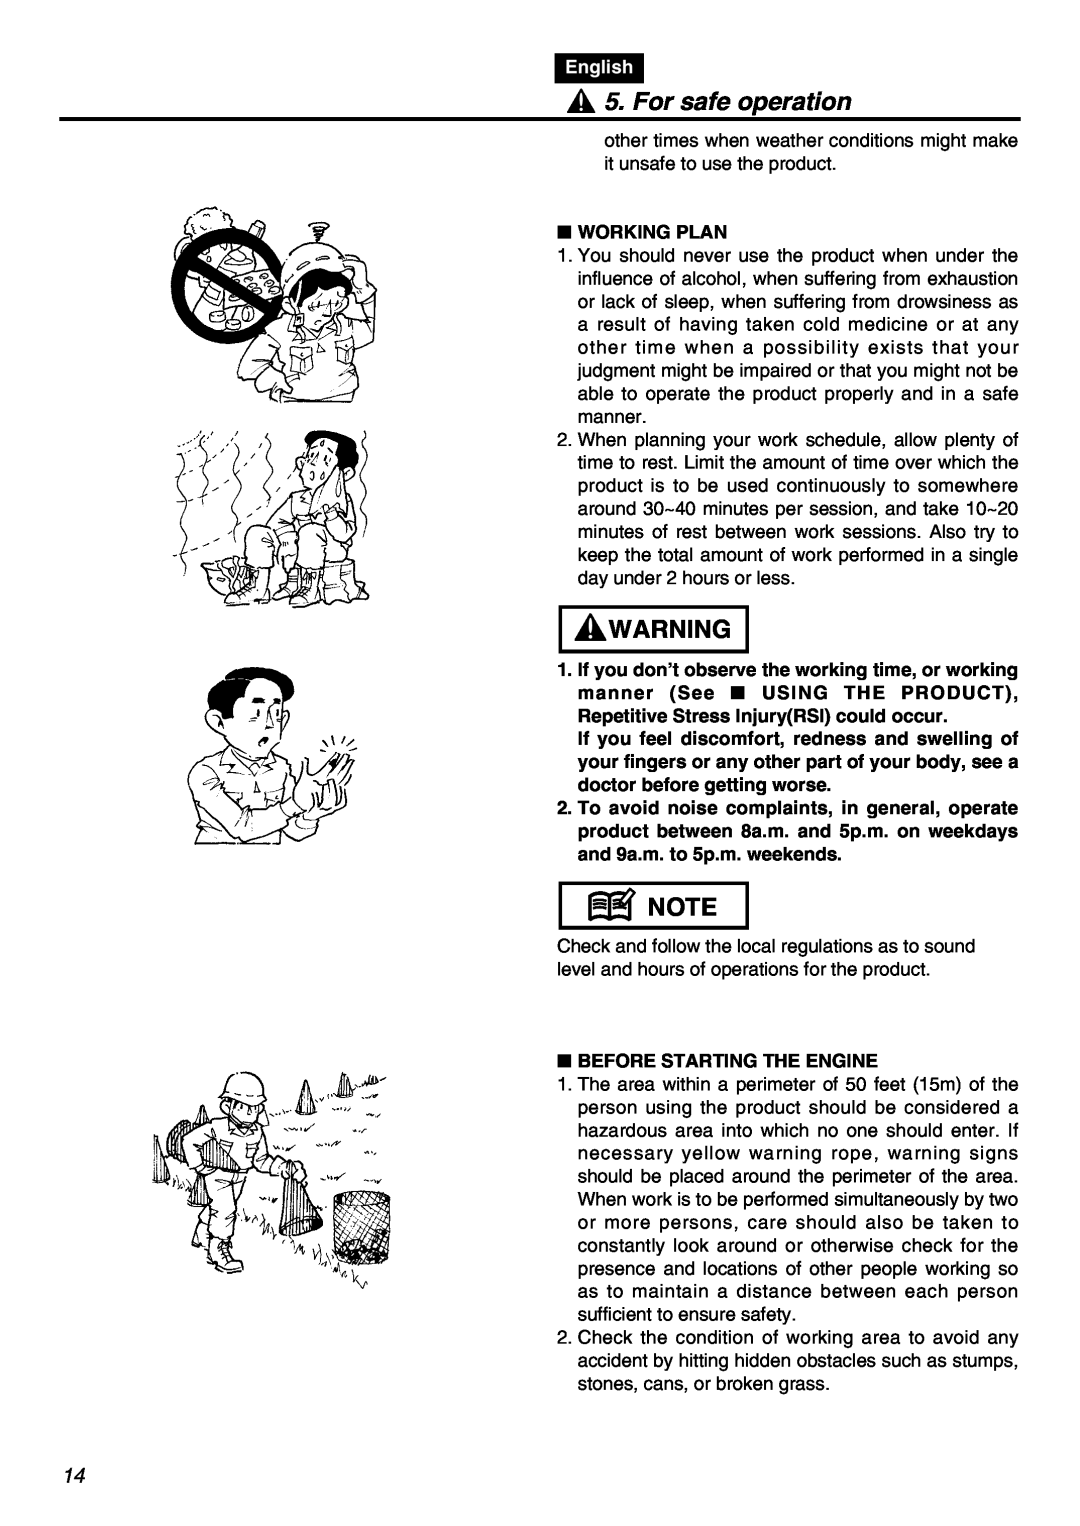 RedMax HEZ2401S, HEZ3001S, HEZ2602S manual For safe operation, English, Working Plan, Repetitive Stress InjuryRSI could occur 